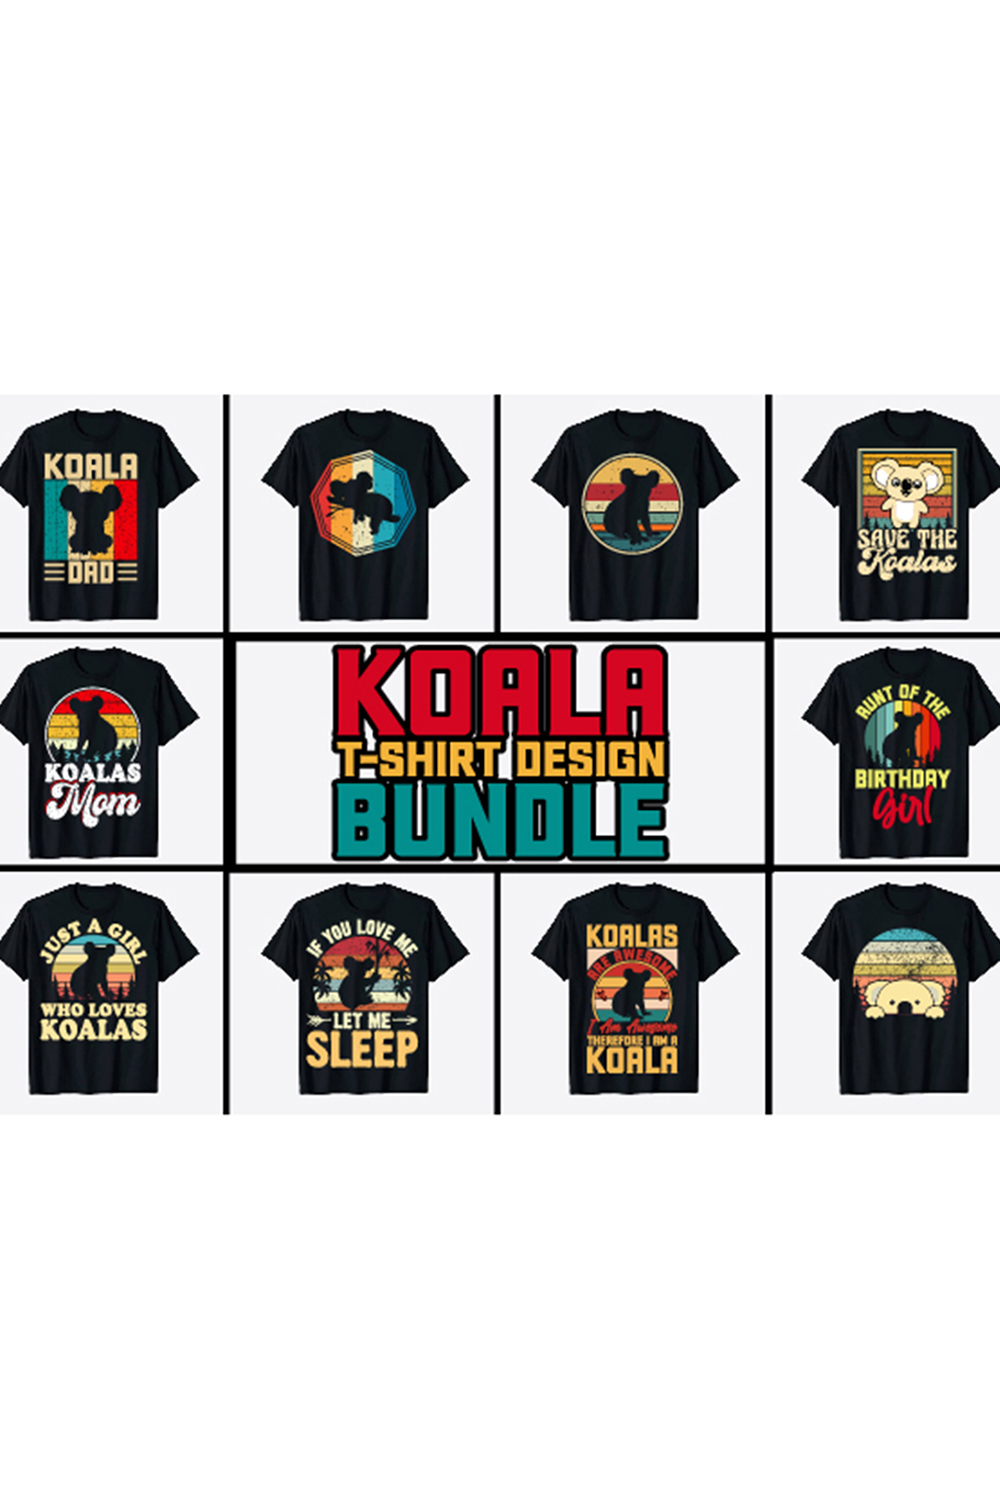 Collection of images of black t-shirts with enchanting prints with koalas.